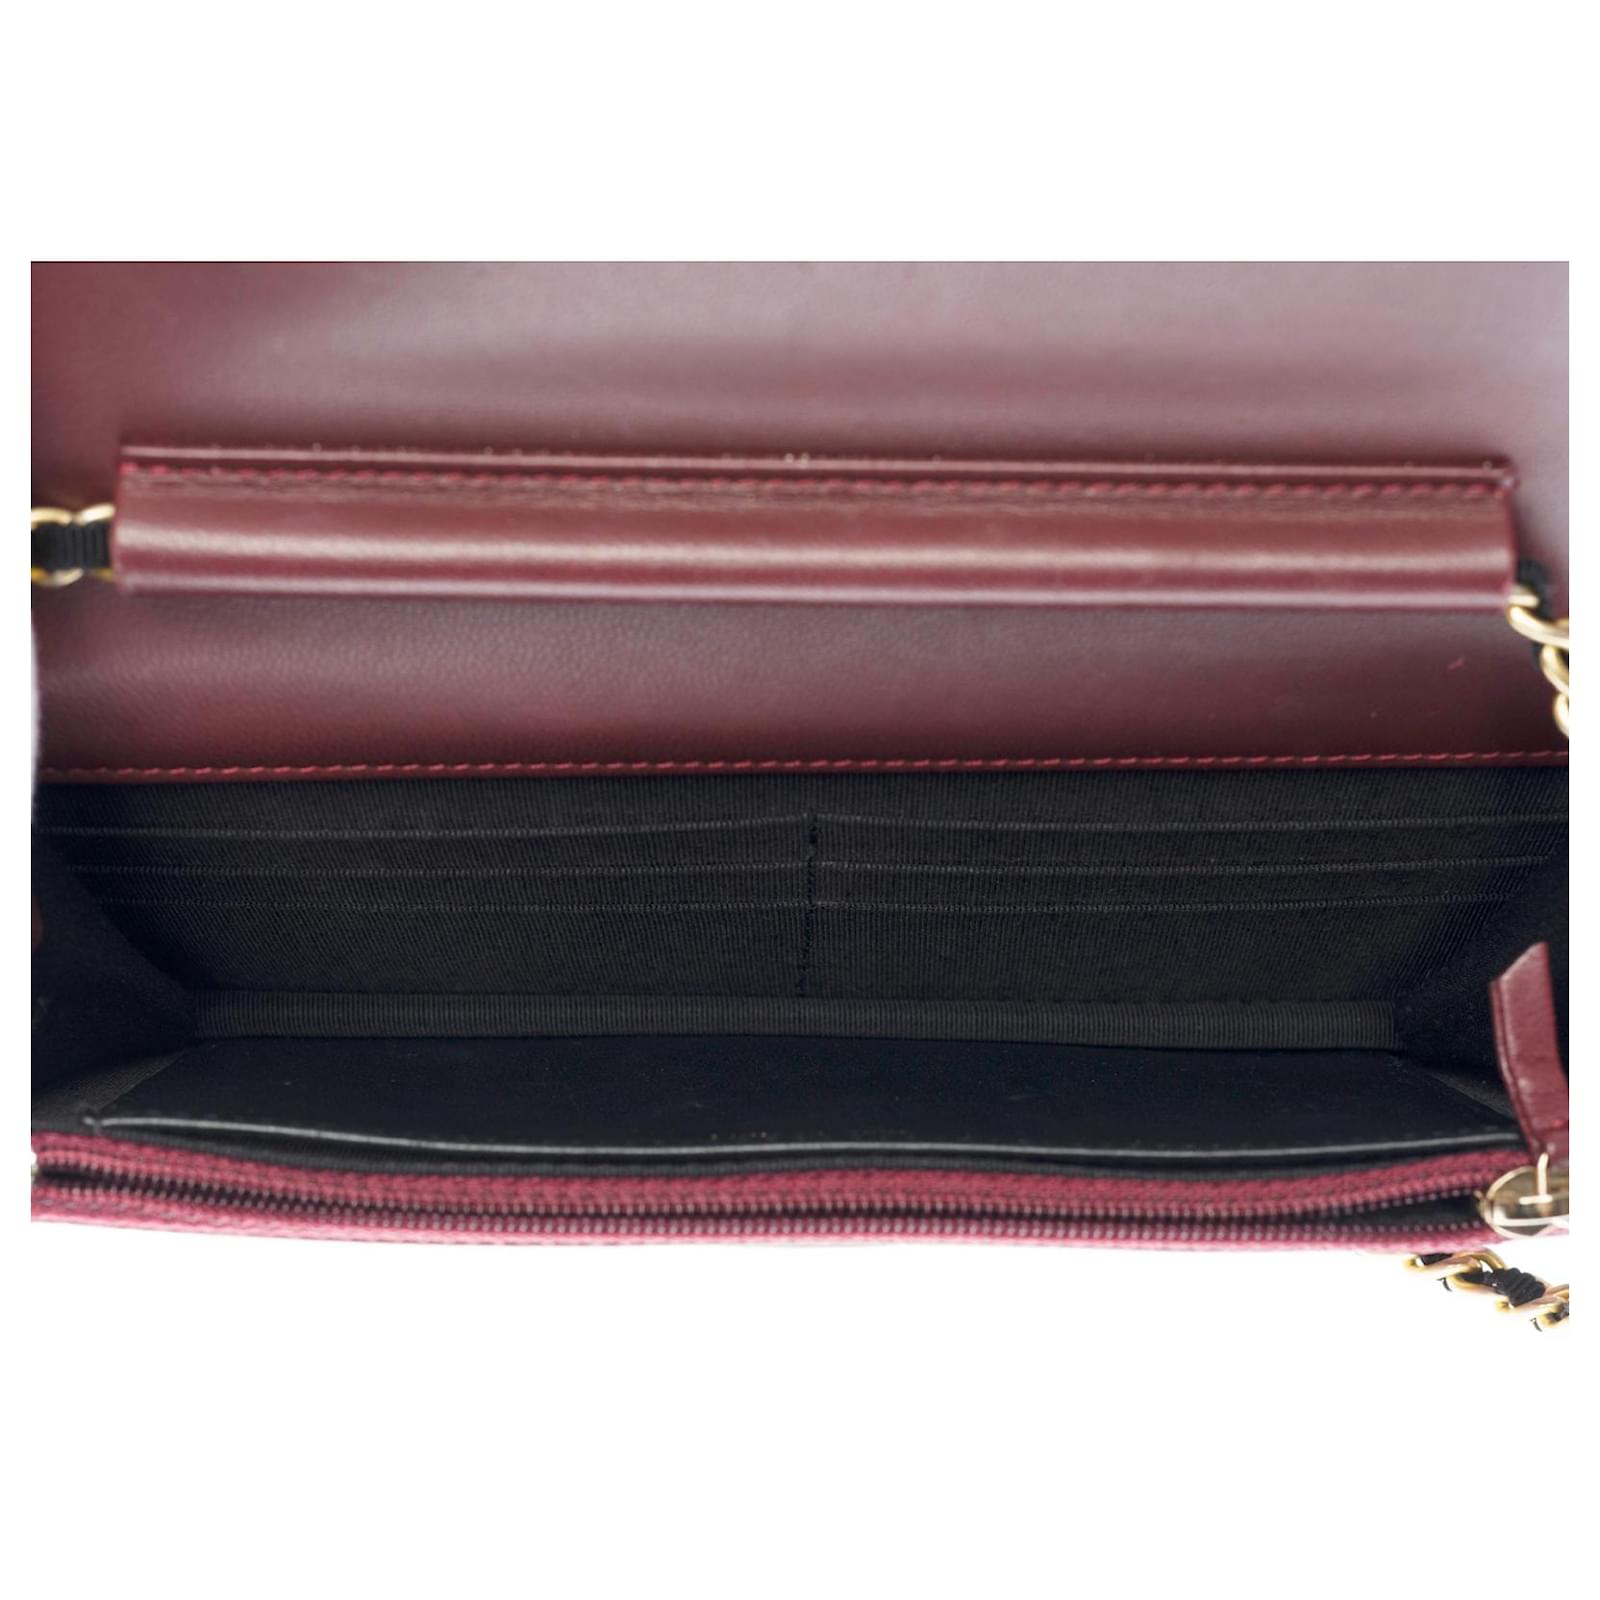 Superb Chanel Wallet On Chain Bag (WOC) limited edition in burgundy and ...